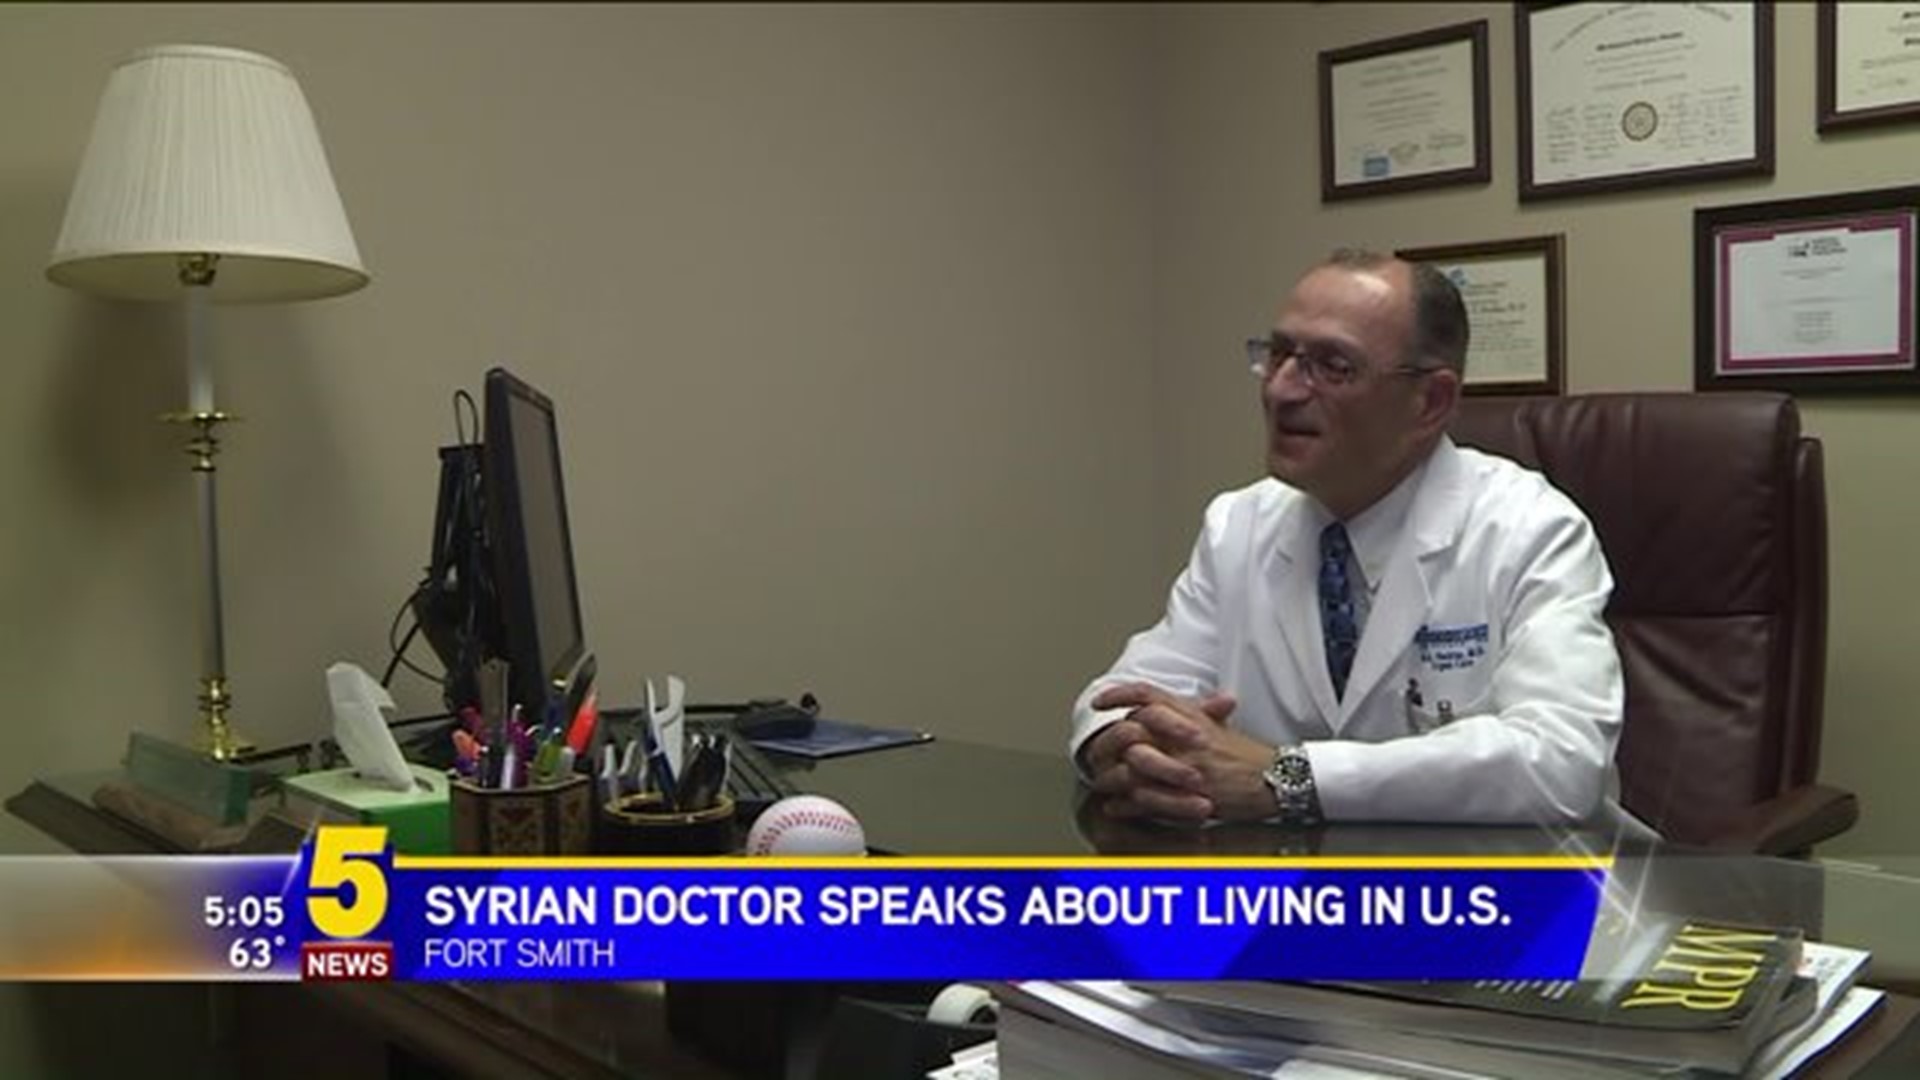 Syrian Doctor Speaks About His Experience In The U.S.